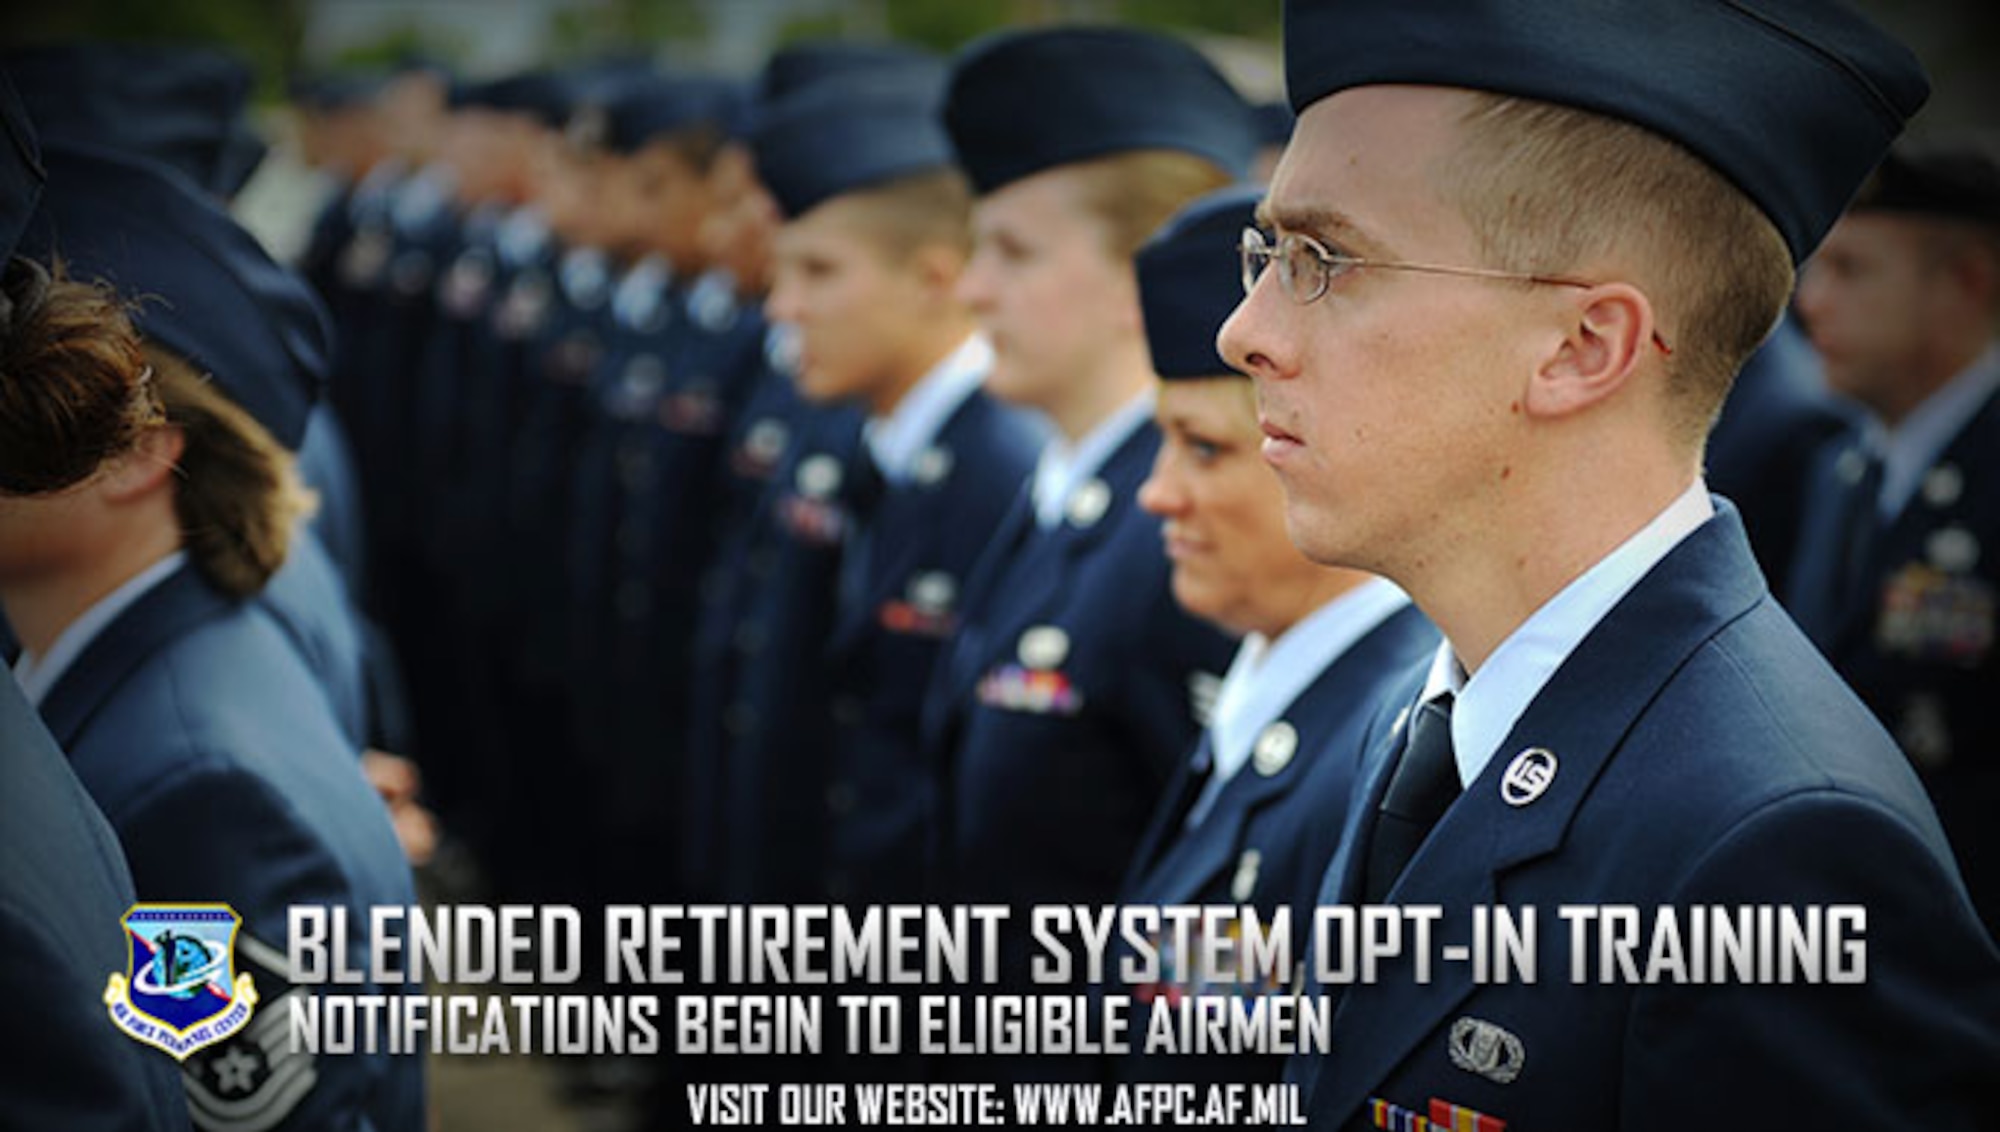 Eligible Airmen are receiving email notifications from myPers which include training on the new Blended Retirement System and the opt-in process. Increased financial education and training is essential to help Airmen make wise financial decisions. The opt-in window will open next year. (Air Force courtesy photo)